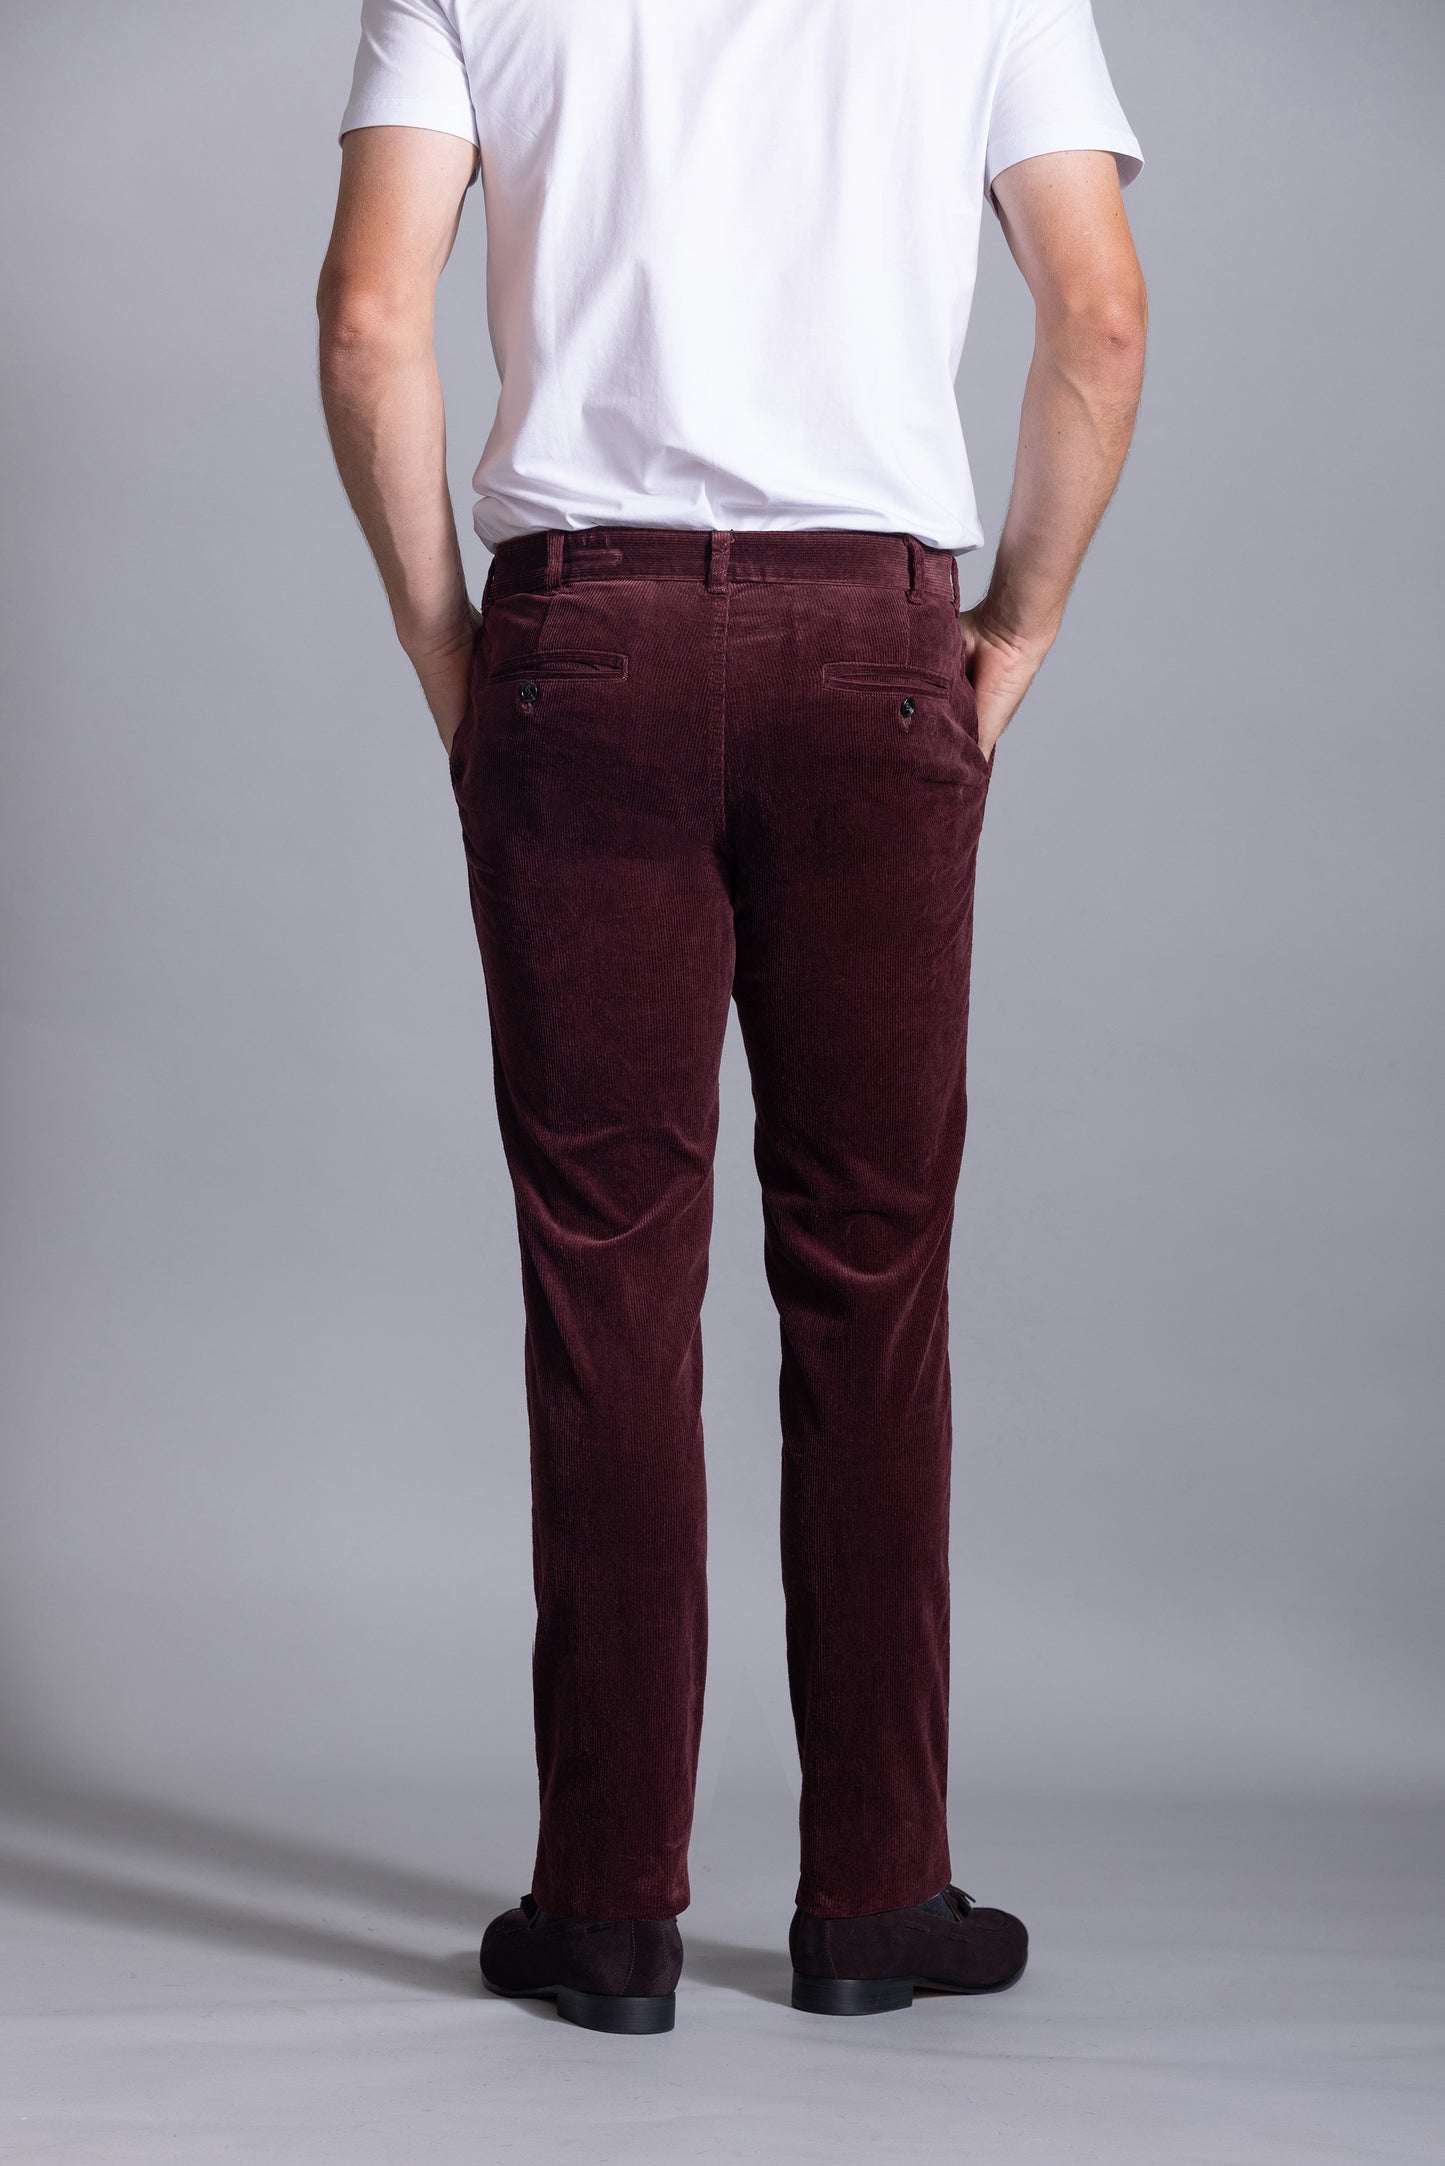 Cutler & Co - Hastin Cord Trousers - Schist or Port